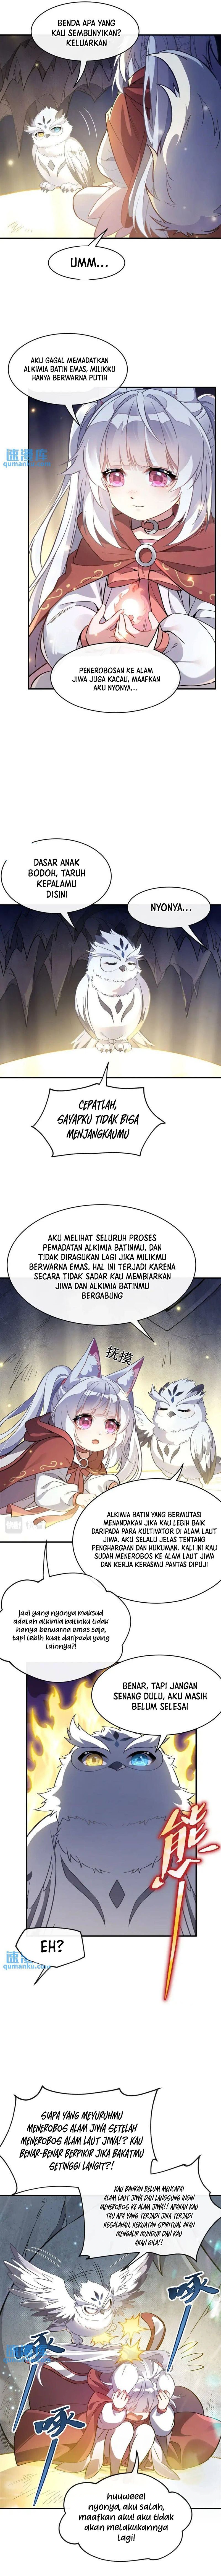 Dilarang COPAS - situs resmi www.mangacanblog.com - Komik my female apprentices are all big shots from the future 198 - chapter 198 199 Indonesia my female apprentices are all big shots from the future 198 - chapter 198 Terbaru 4|Baca Manga Komik Indonesia|Mangacan